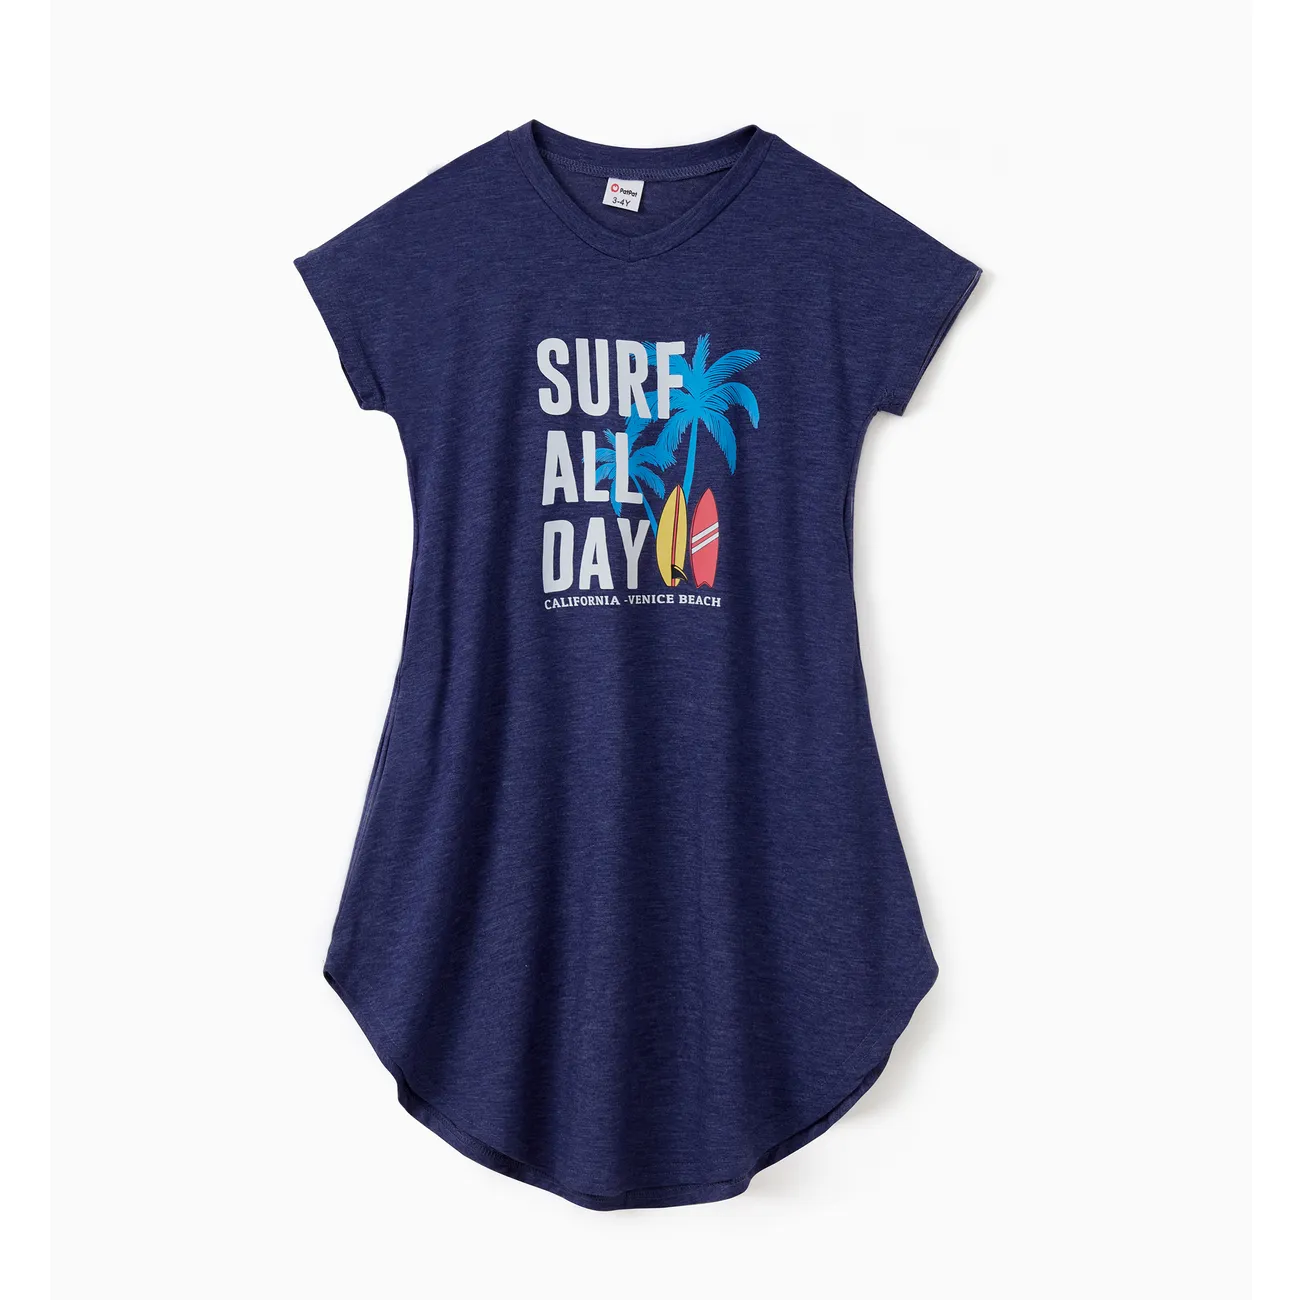 Family Matching Sets Deep Blue Coconut Tree and Slogan Printed Tee or Short Sleeves A-Line Dress With Pockets Deep Blue big image 1